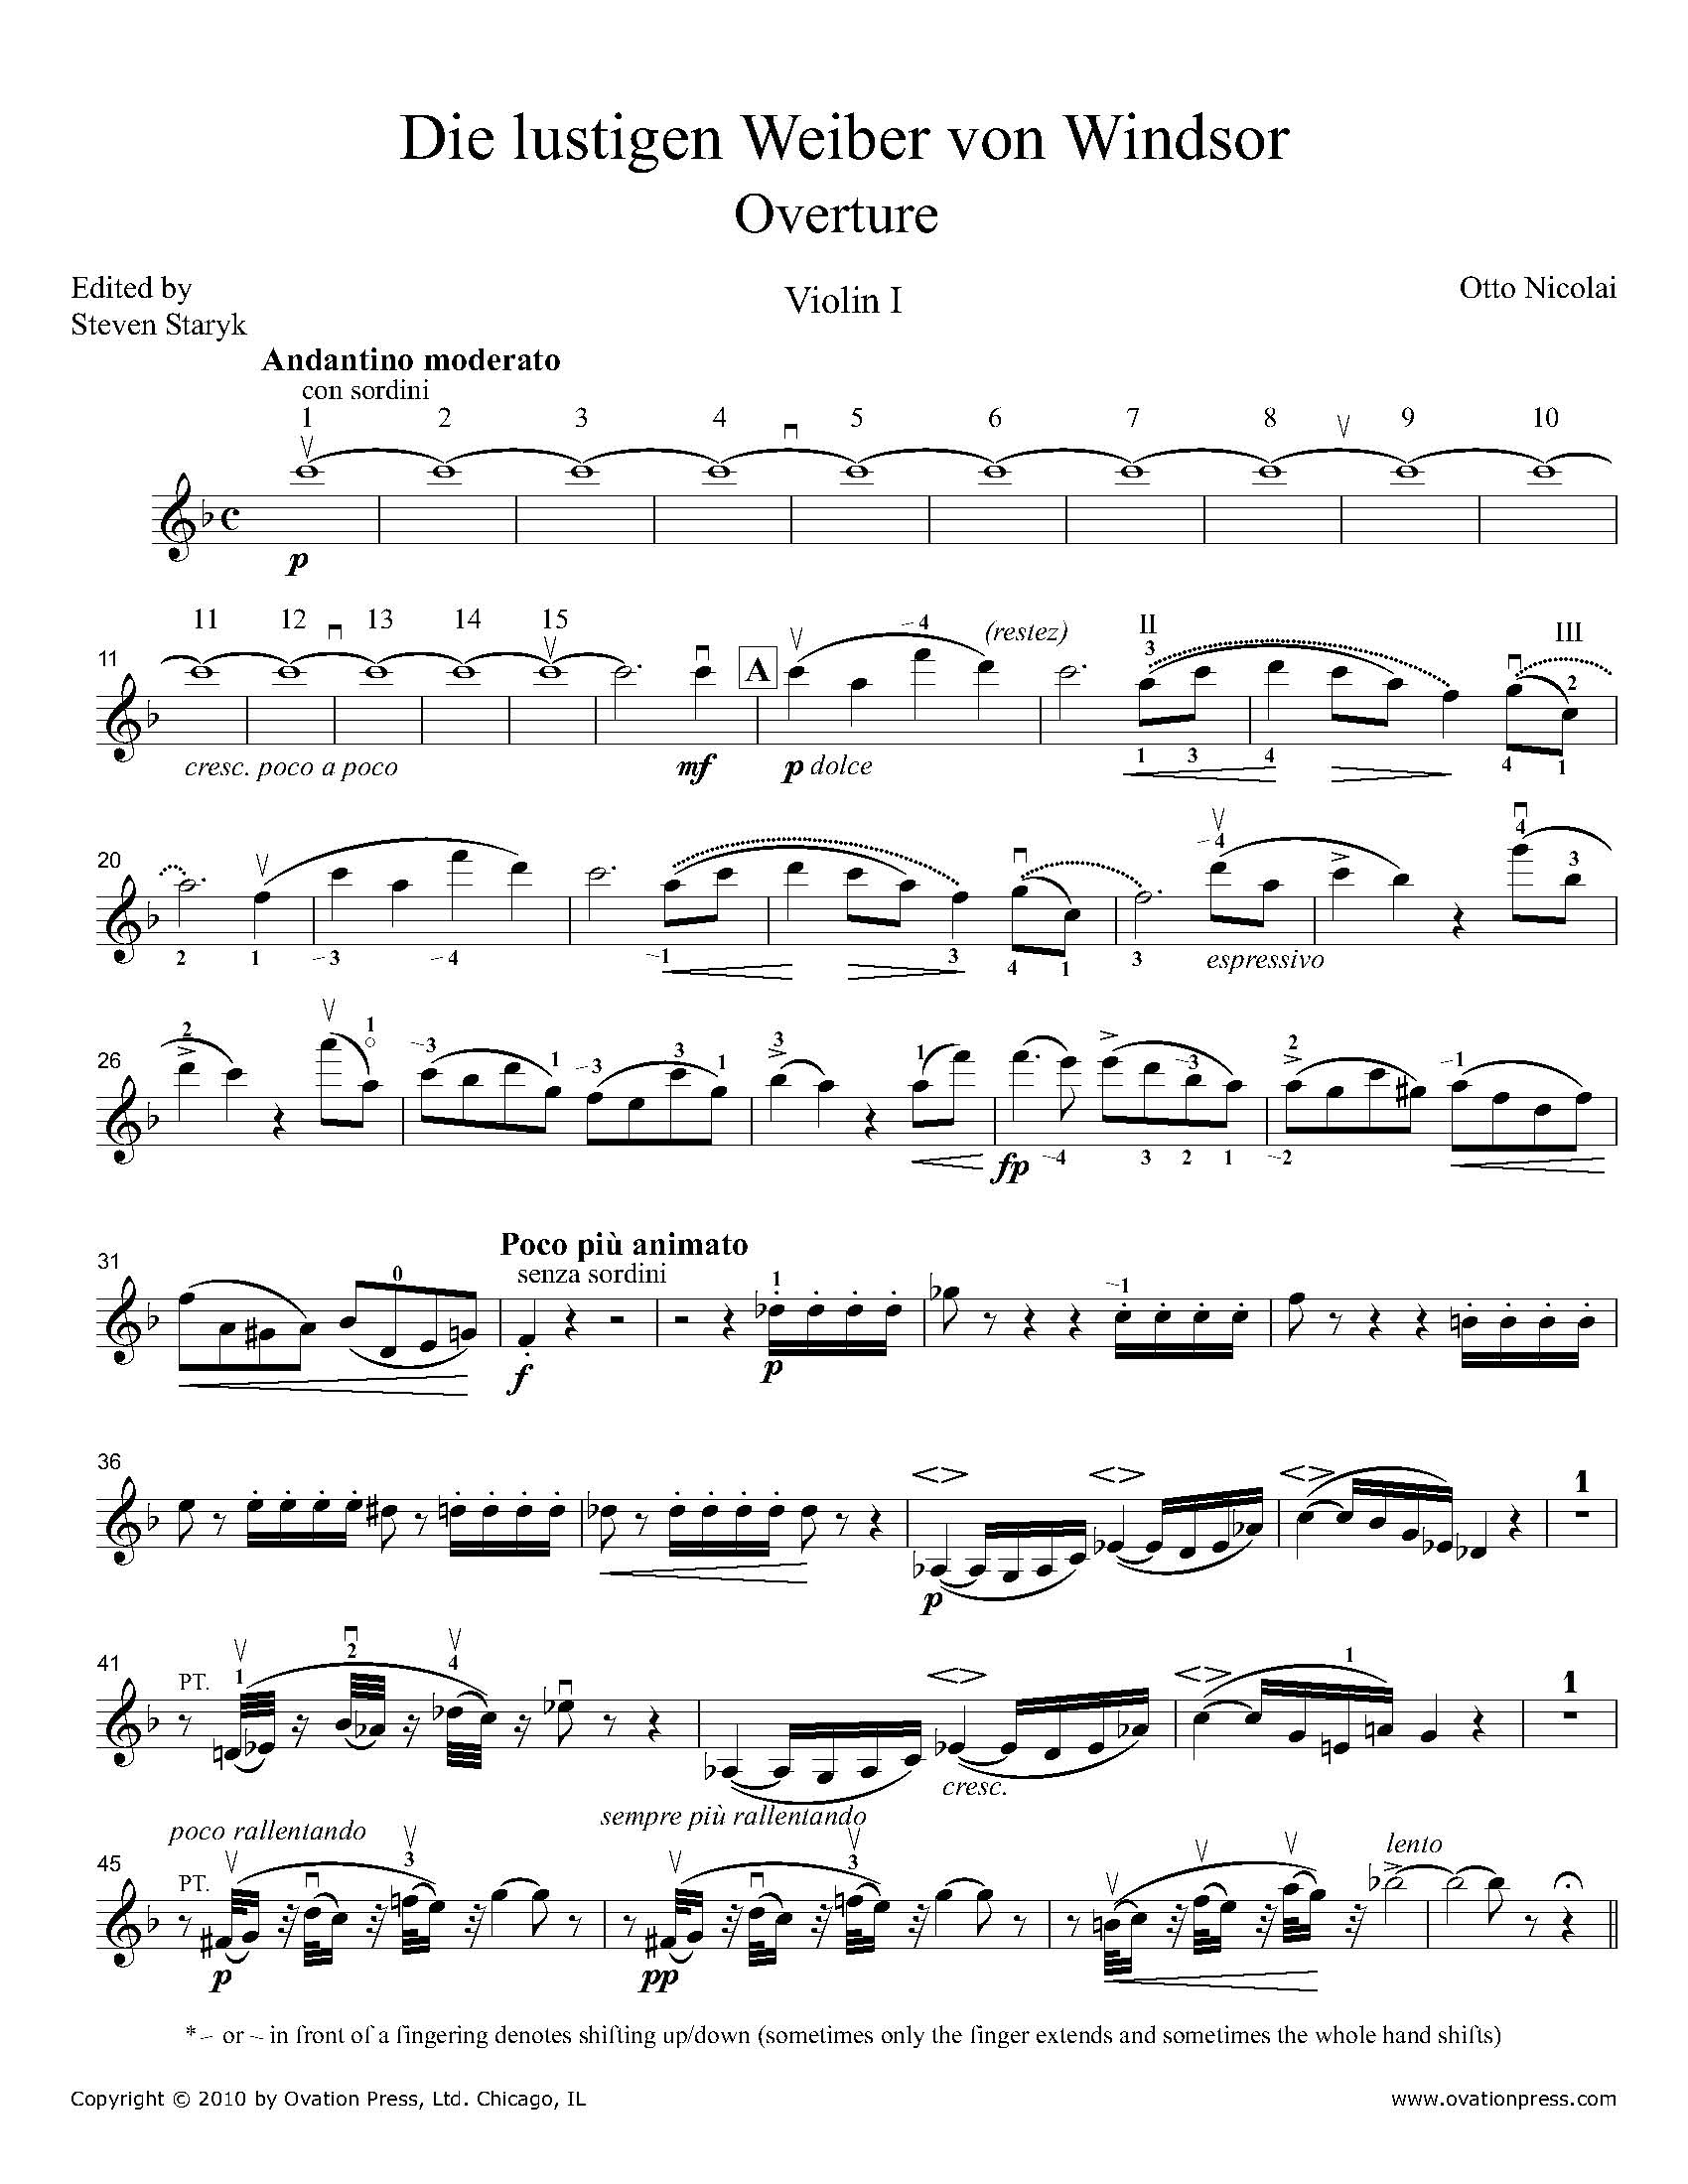 Nicolai The Merry Wives of Windsor Overture - Violin I